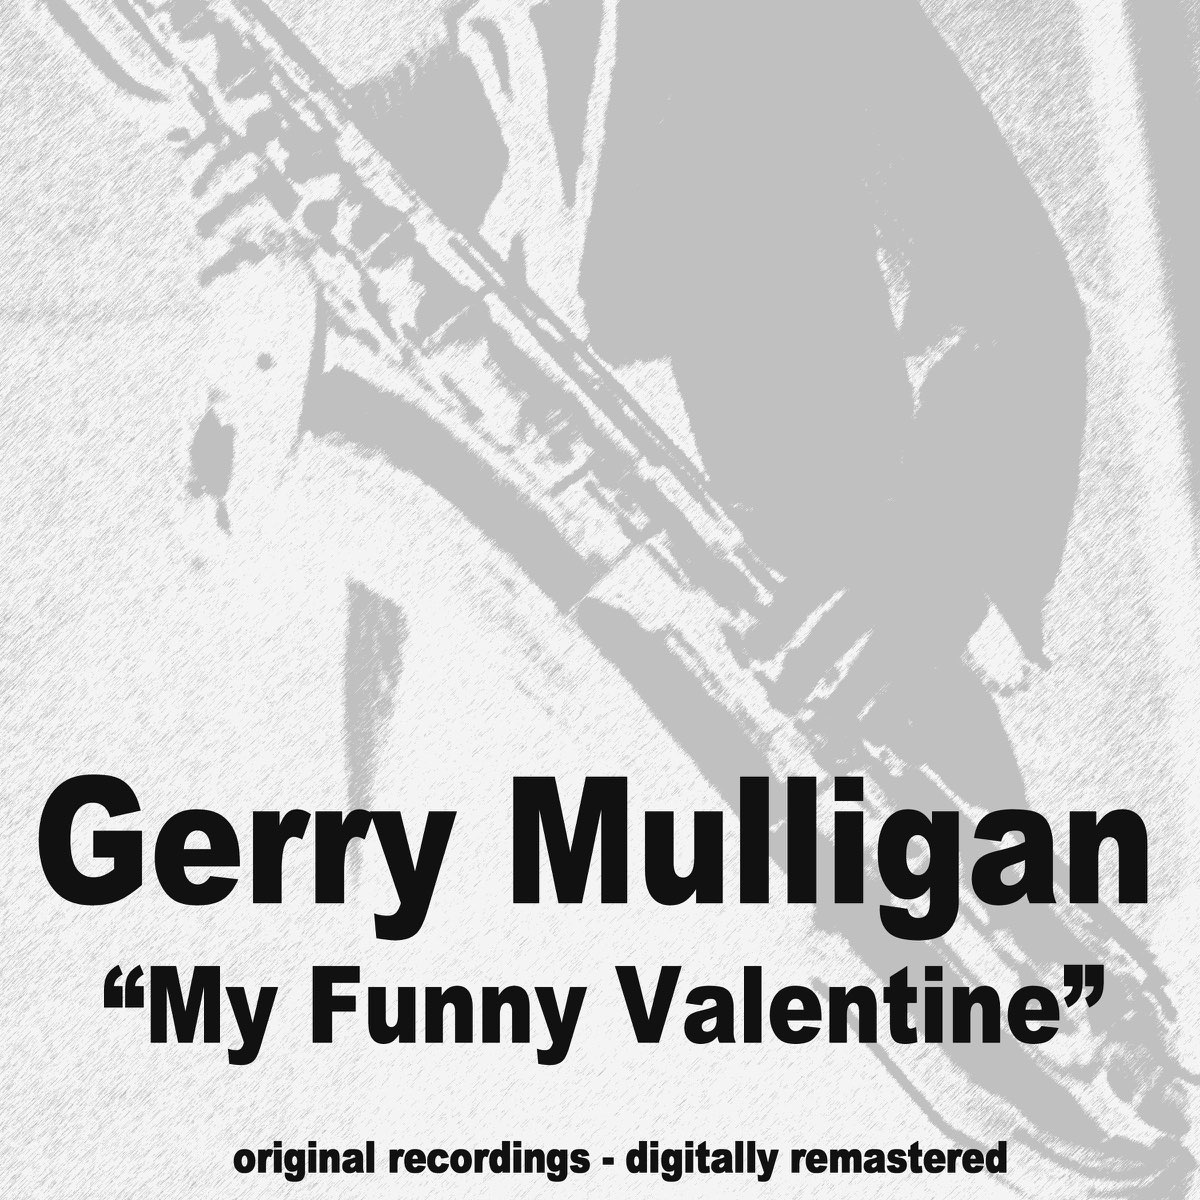 My Funny Valentine by Gerry Mulligan on Apple Music